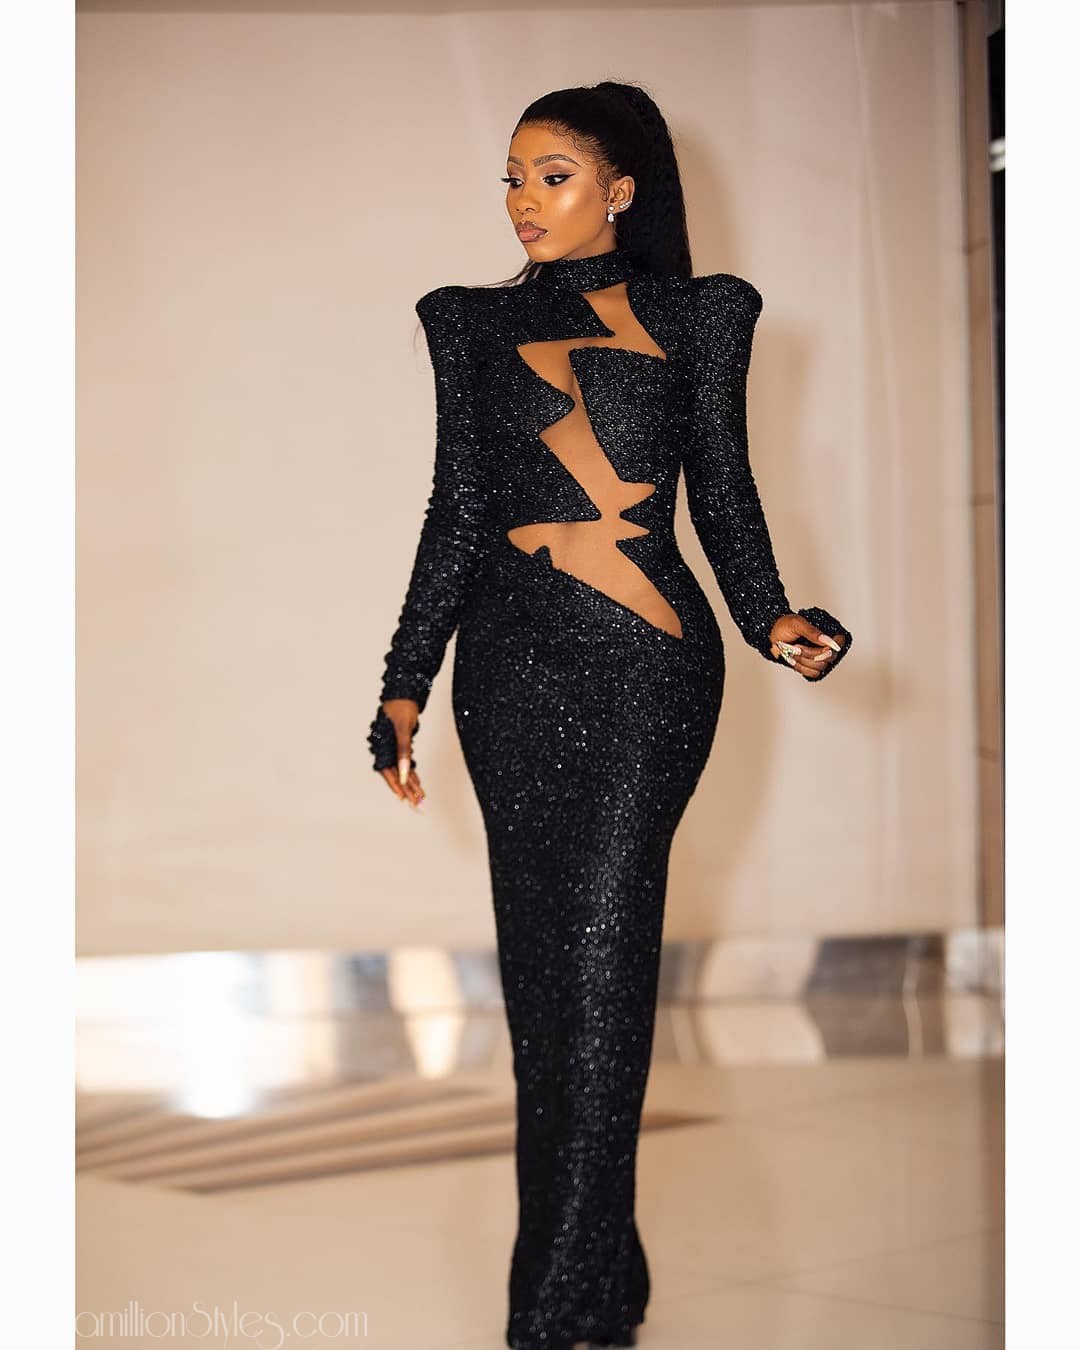 Styles From the 2019 Headies Awards